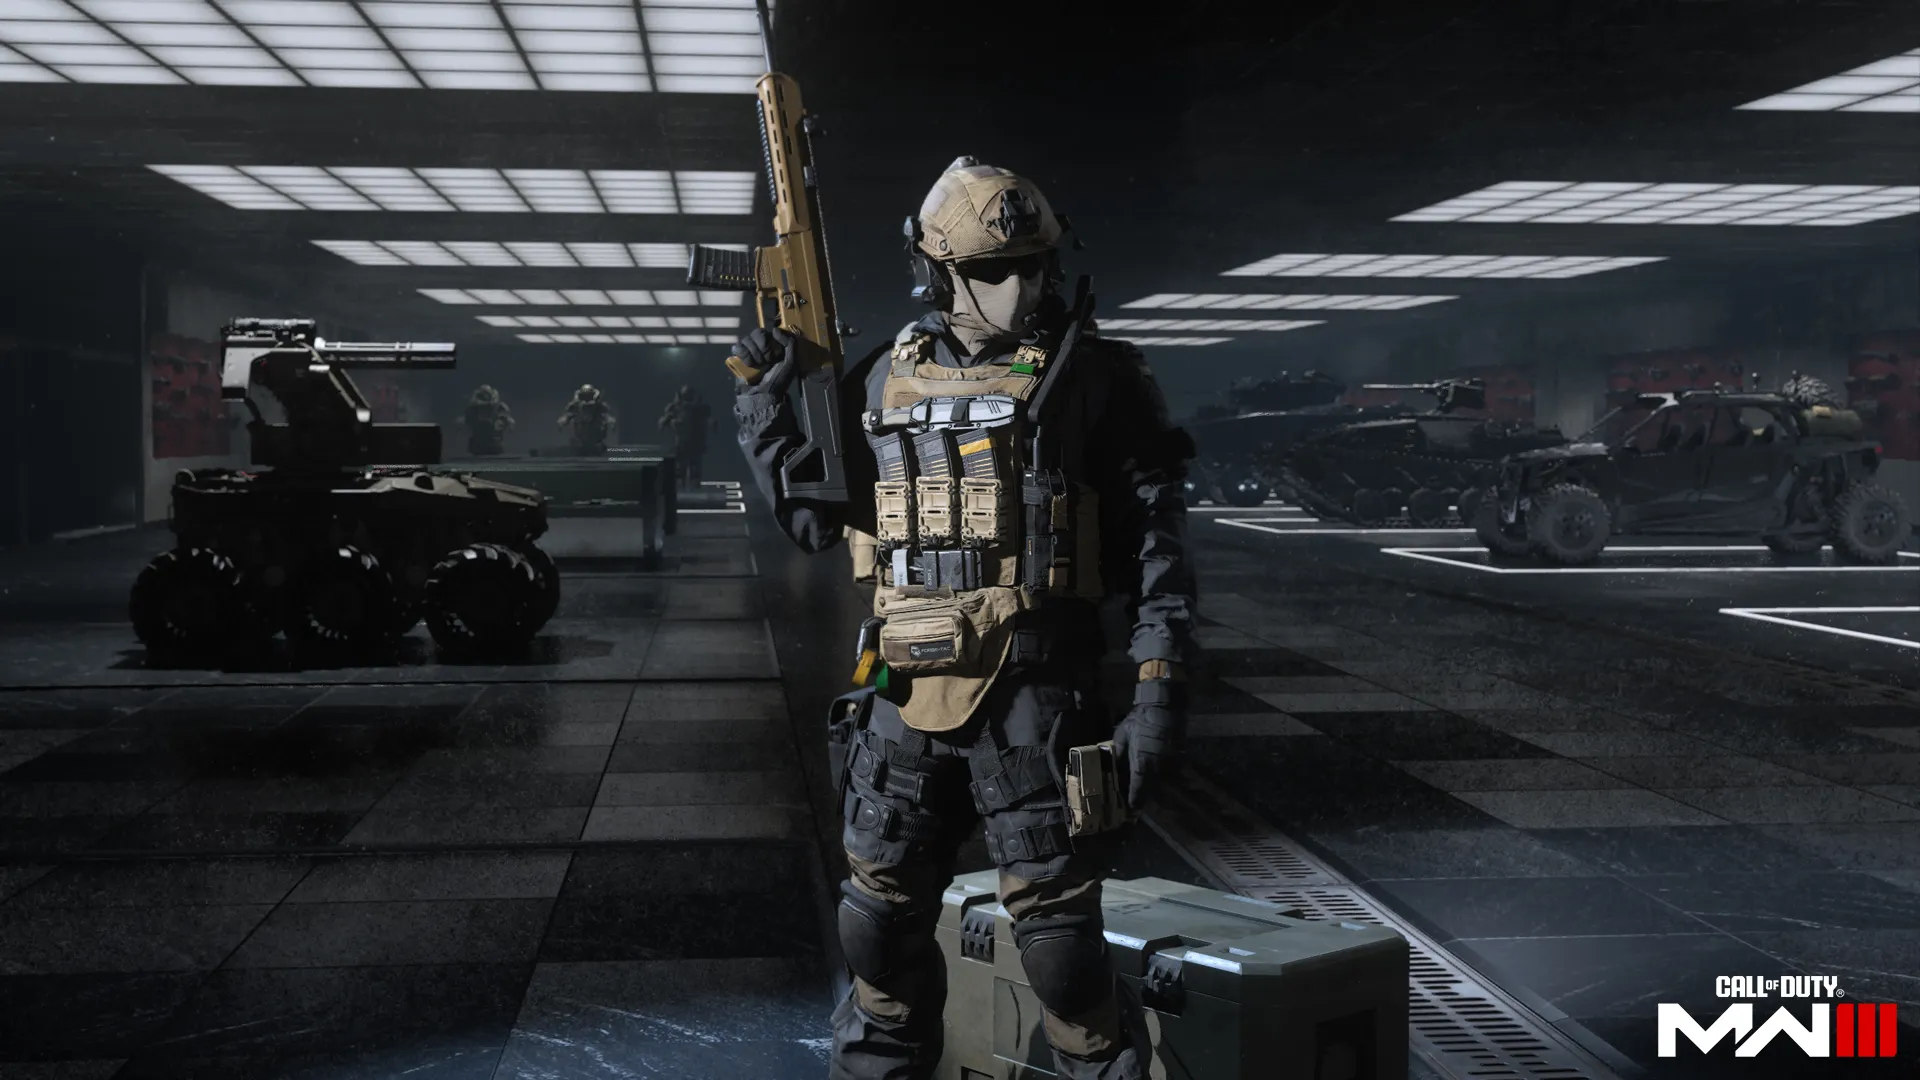 Call of Duty: Modern Warfare III:' How To Buy Online, Availability.